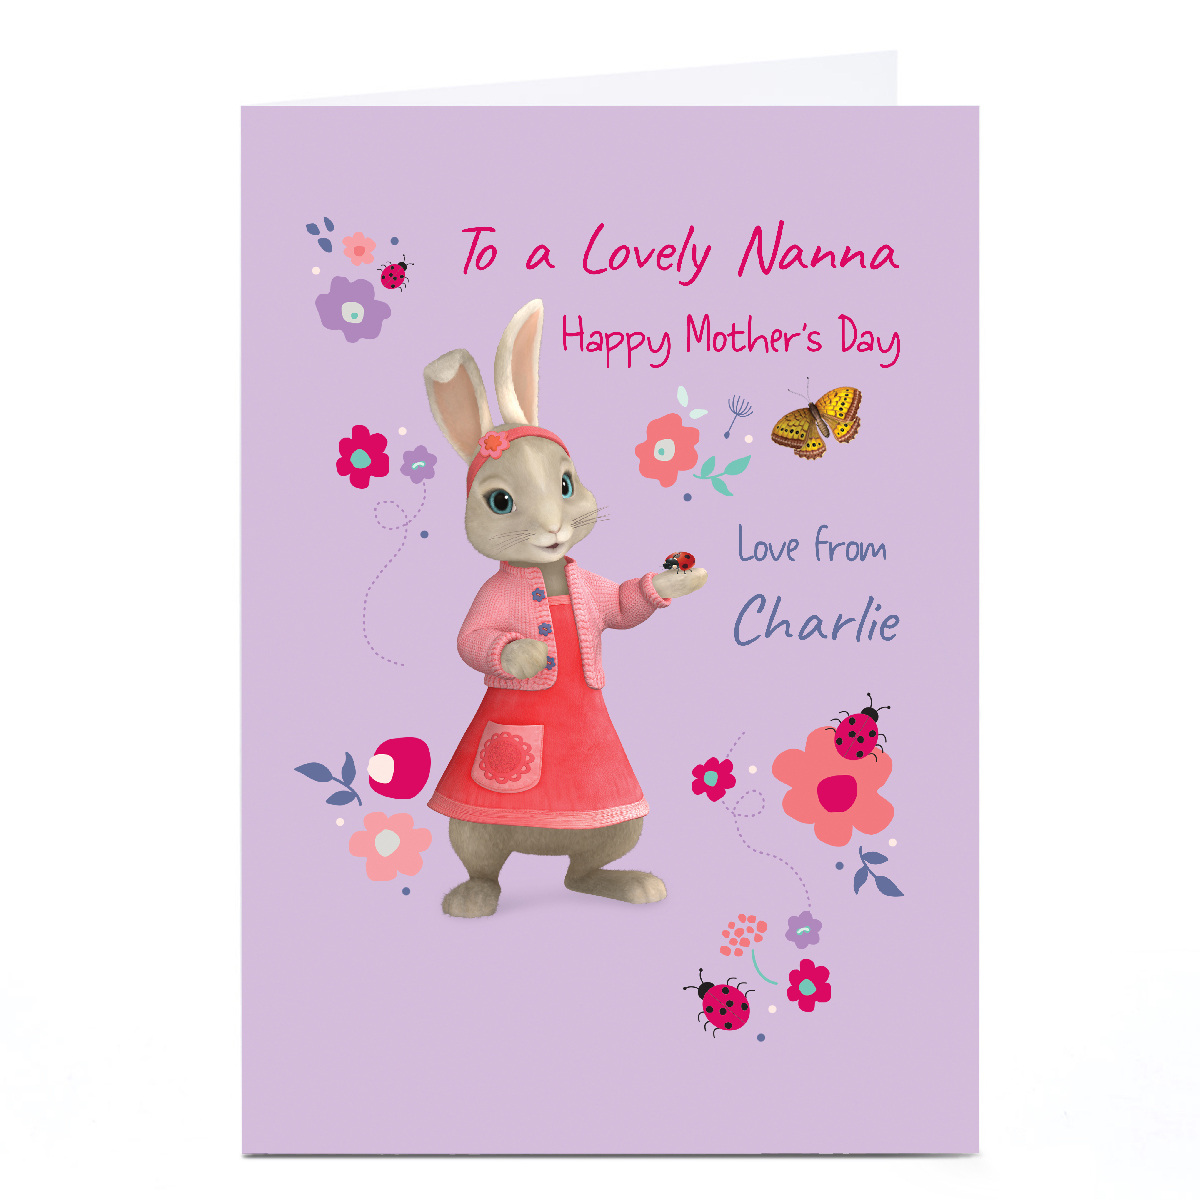 Personalised Peter Rabbit Mother's Day Card - Lily Bobtail, Nanna